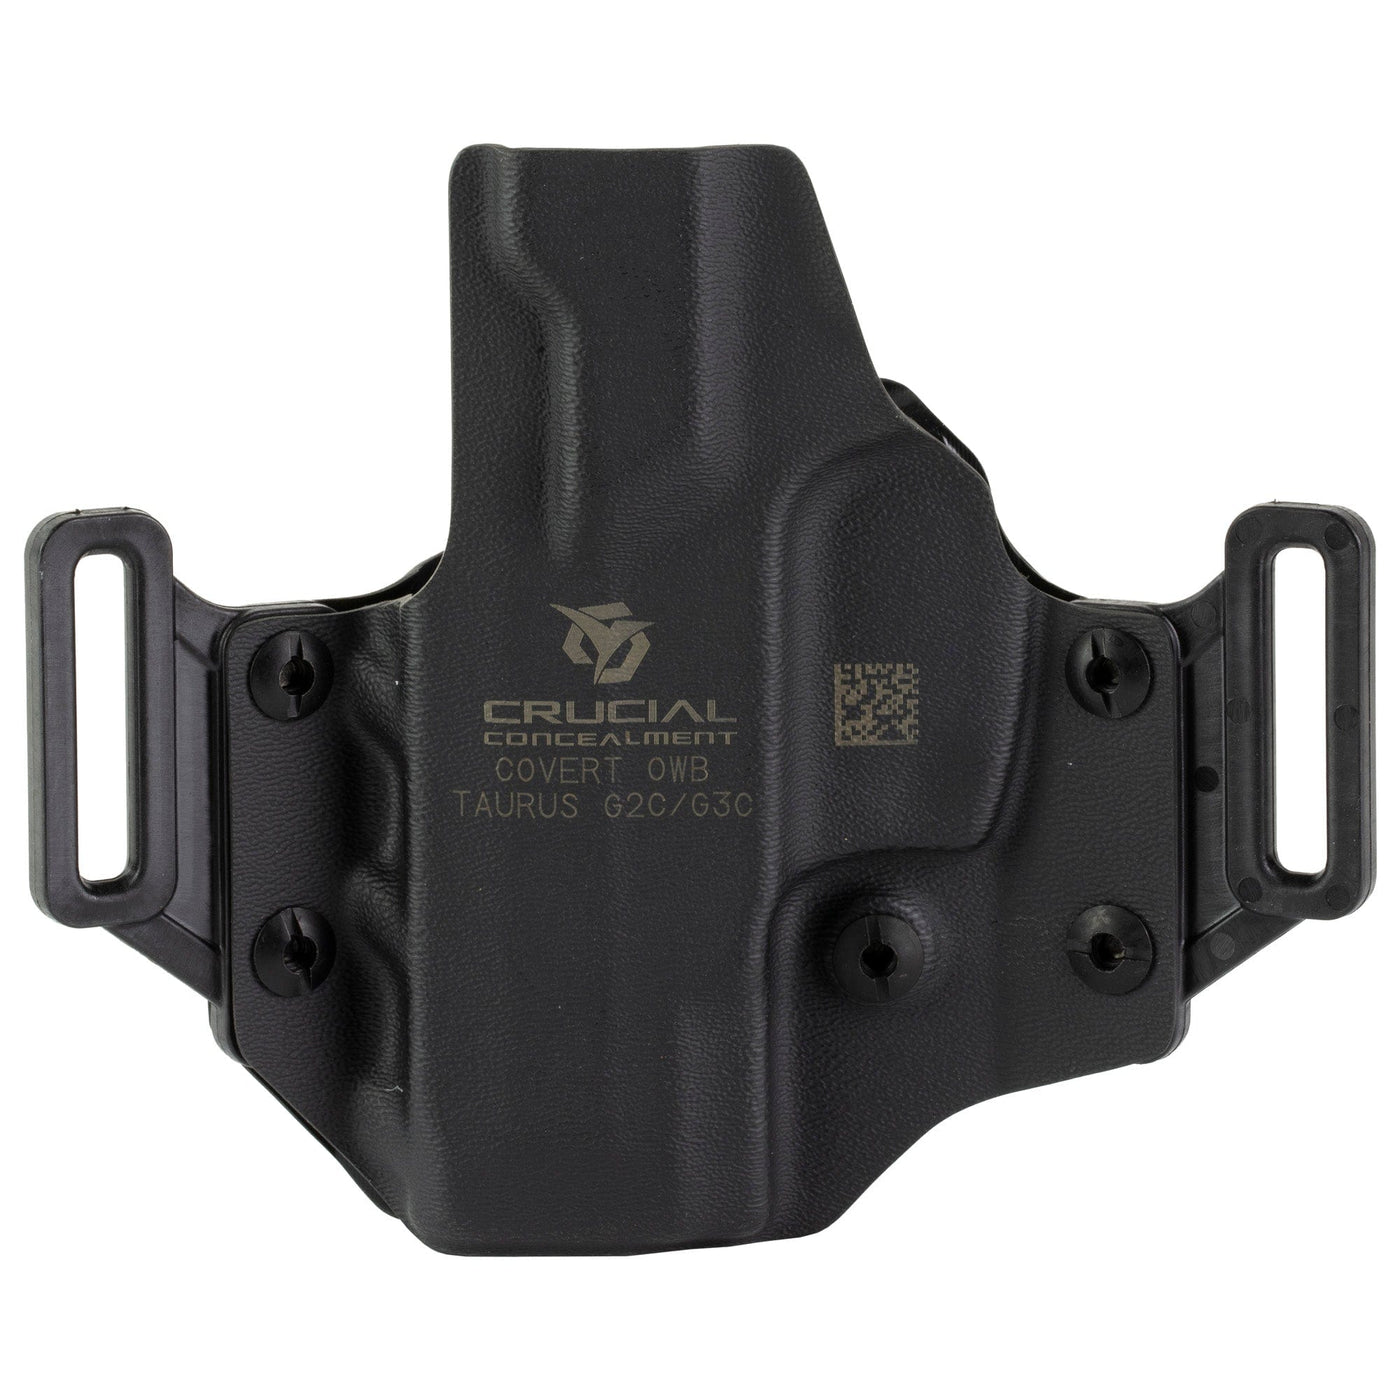 Crucial Concealment Crucial Owb For Taurus G3c/g2c Holsters